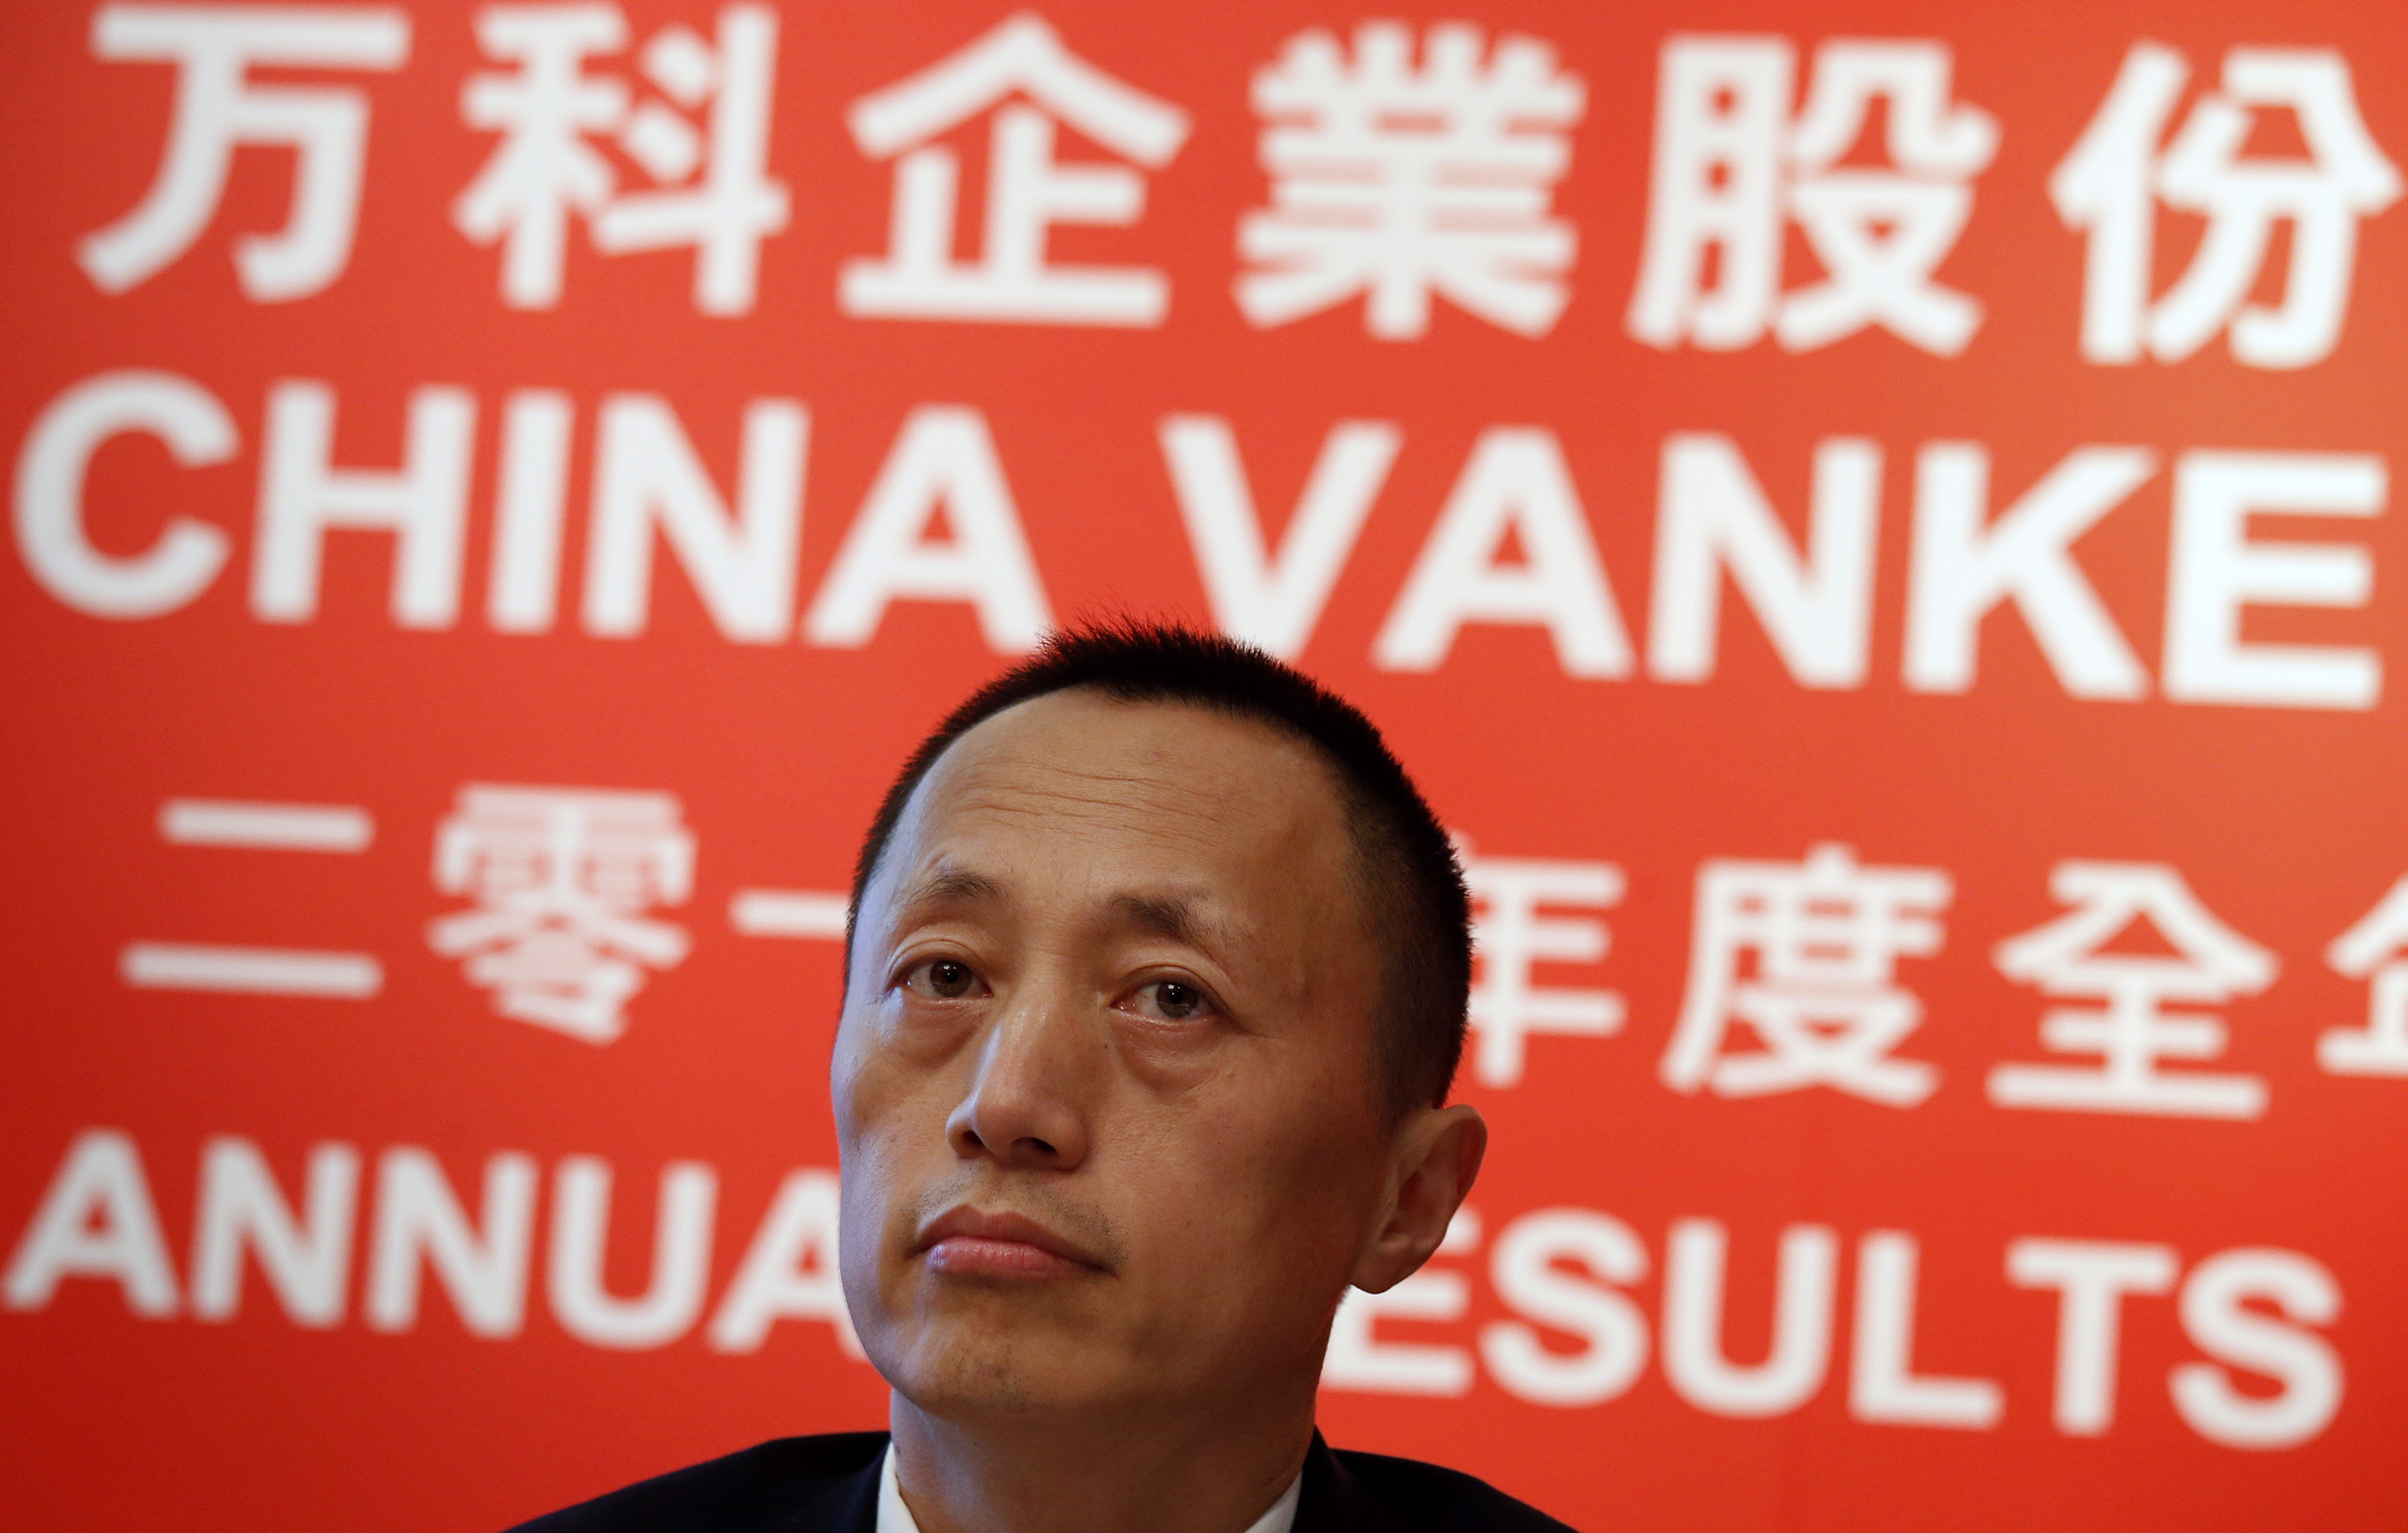 President of China Vanke Co Ltd Yu Liang attends a news conference in Hong Kong